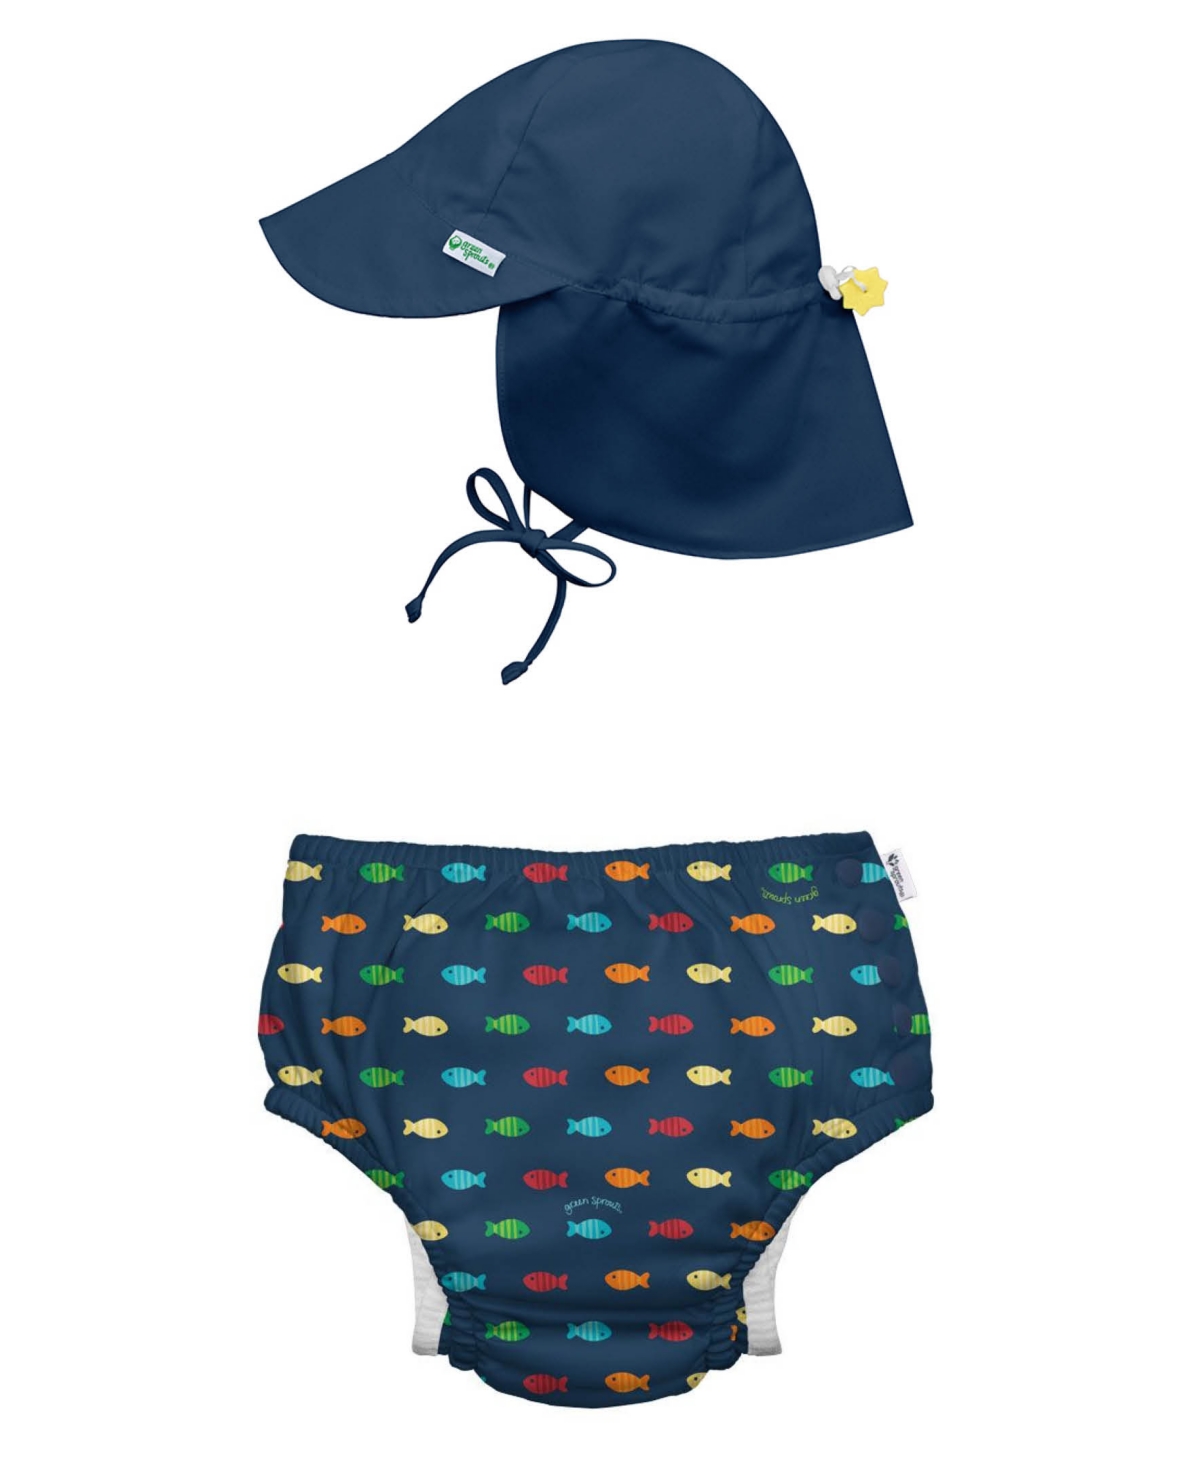 Green Sprouts Baby Boys Or Baby Girls Snap Swim Diaper And Flap Hat Upf 50, 2 Piece Set In Navy Fish Geo